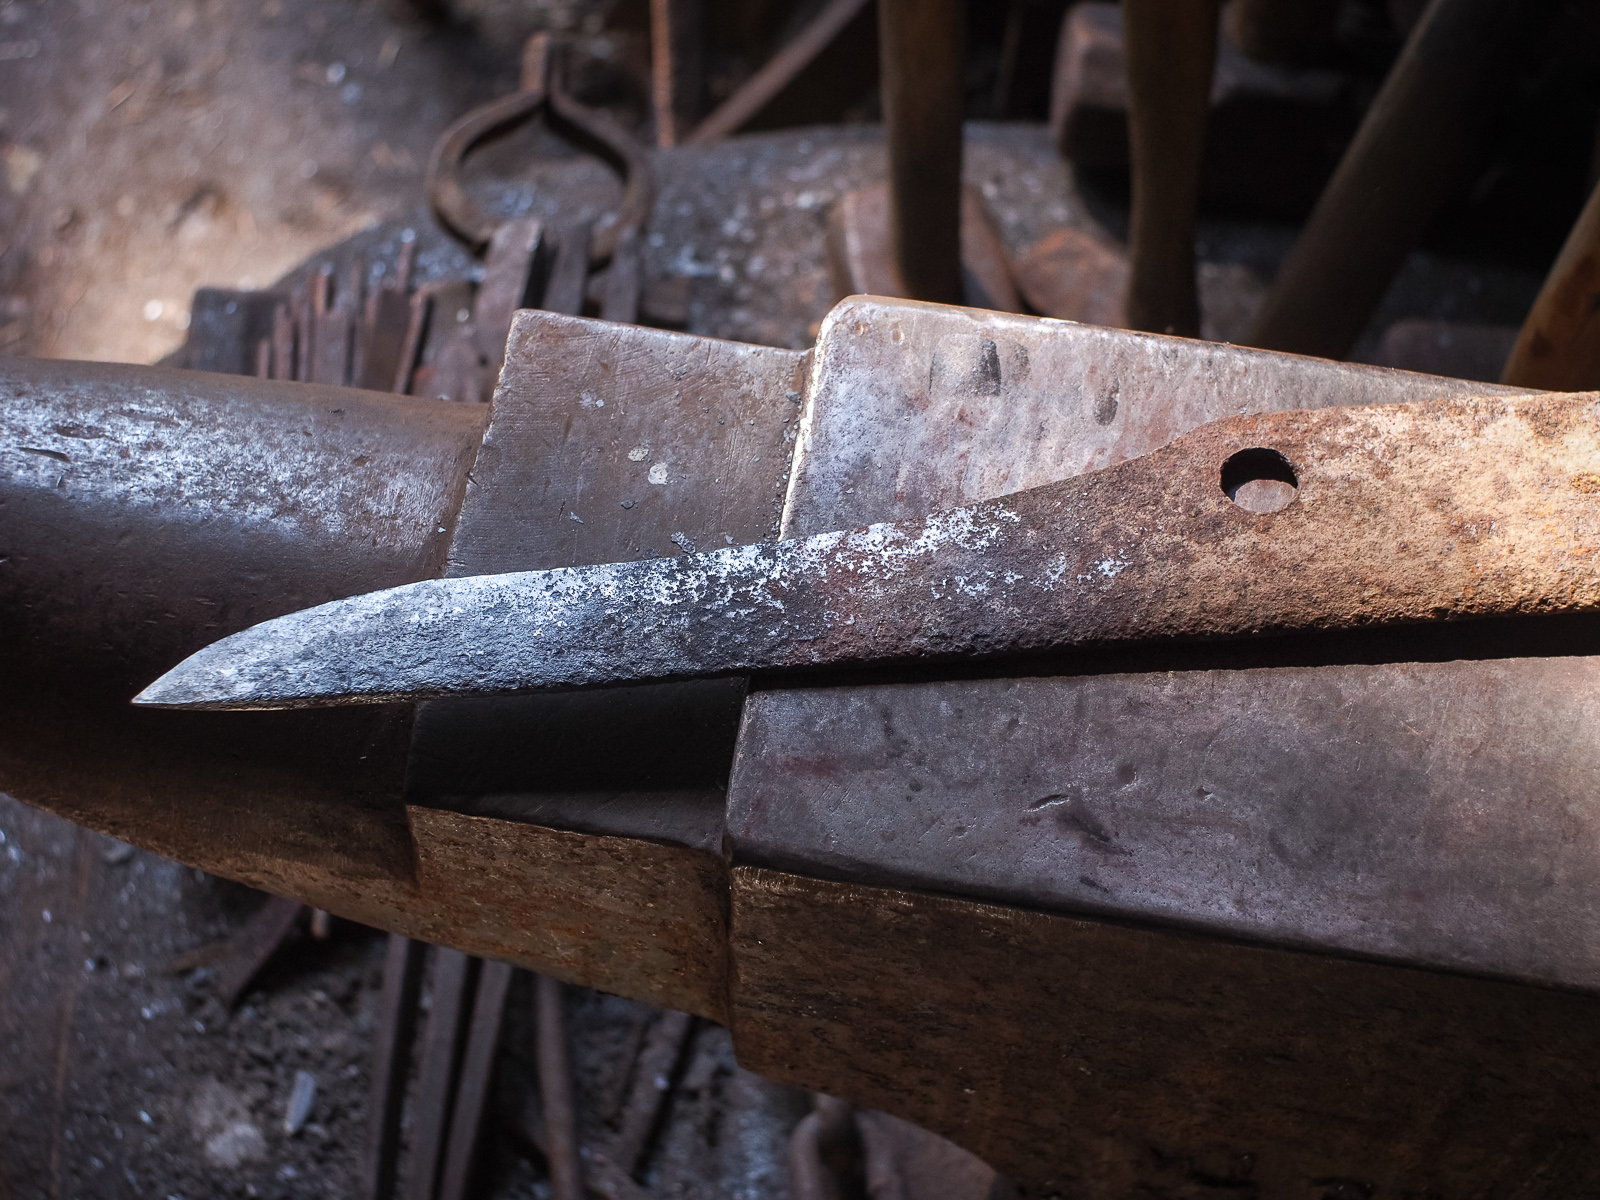 Island Blacksmith: Charcoal forged blades made from reclaimed and natural materials using traditional techniques